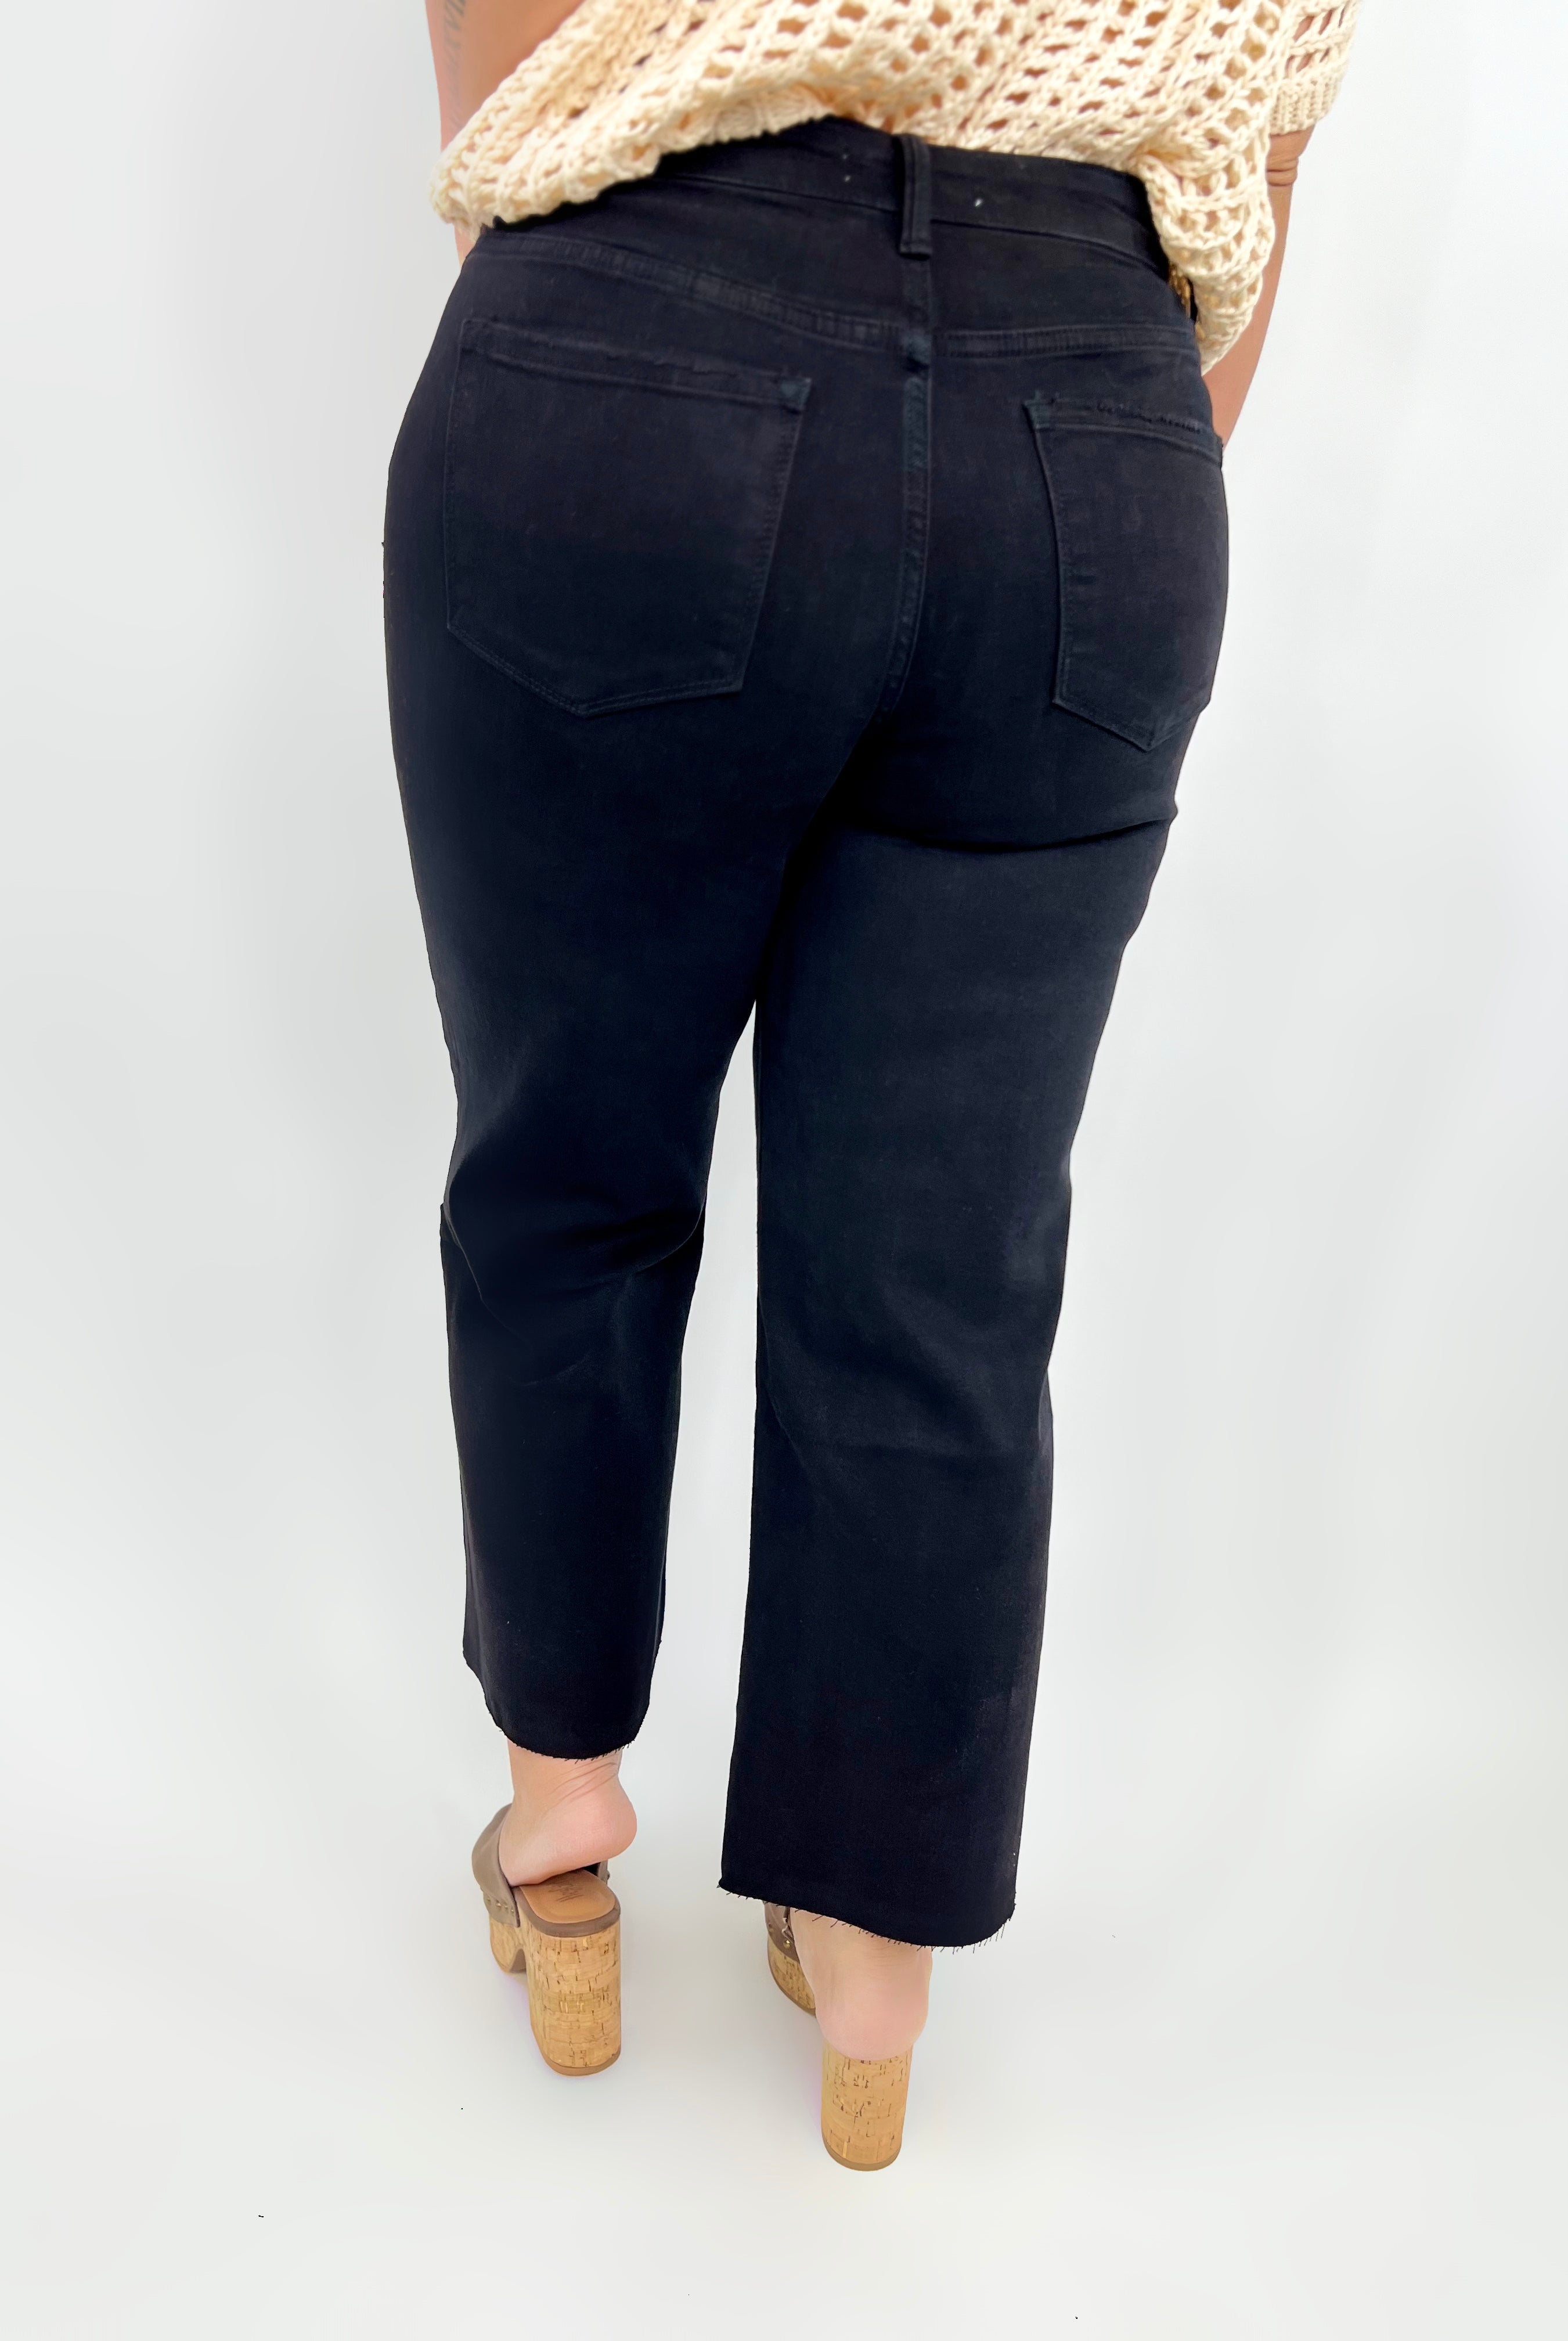 Dark Skies Cropped Wide Leg Jeans by Vervet-190 Jeans-Vervet-Heathered Boho Boutique, Women's Fashion and Accessories in Palmetto, FL